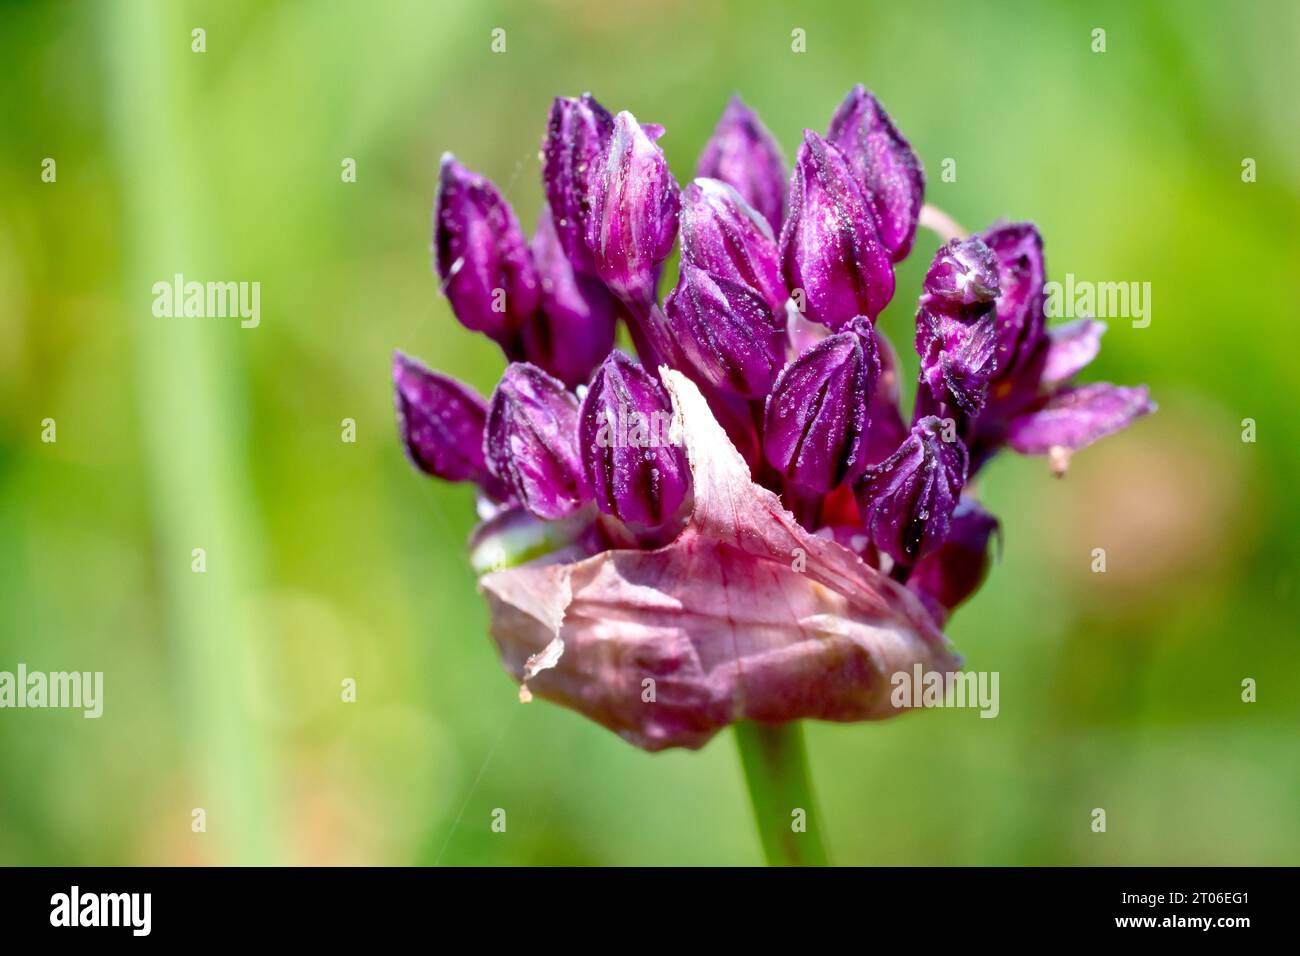 Close up of an allium, possibly Field Garlic (allium oleraceum), showing the loosely packed purple flowerbuds emerging from their papery sheath. Stock Photo